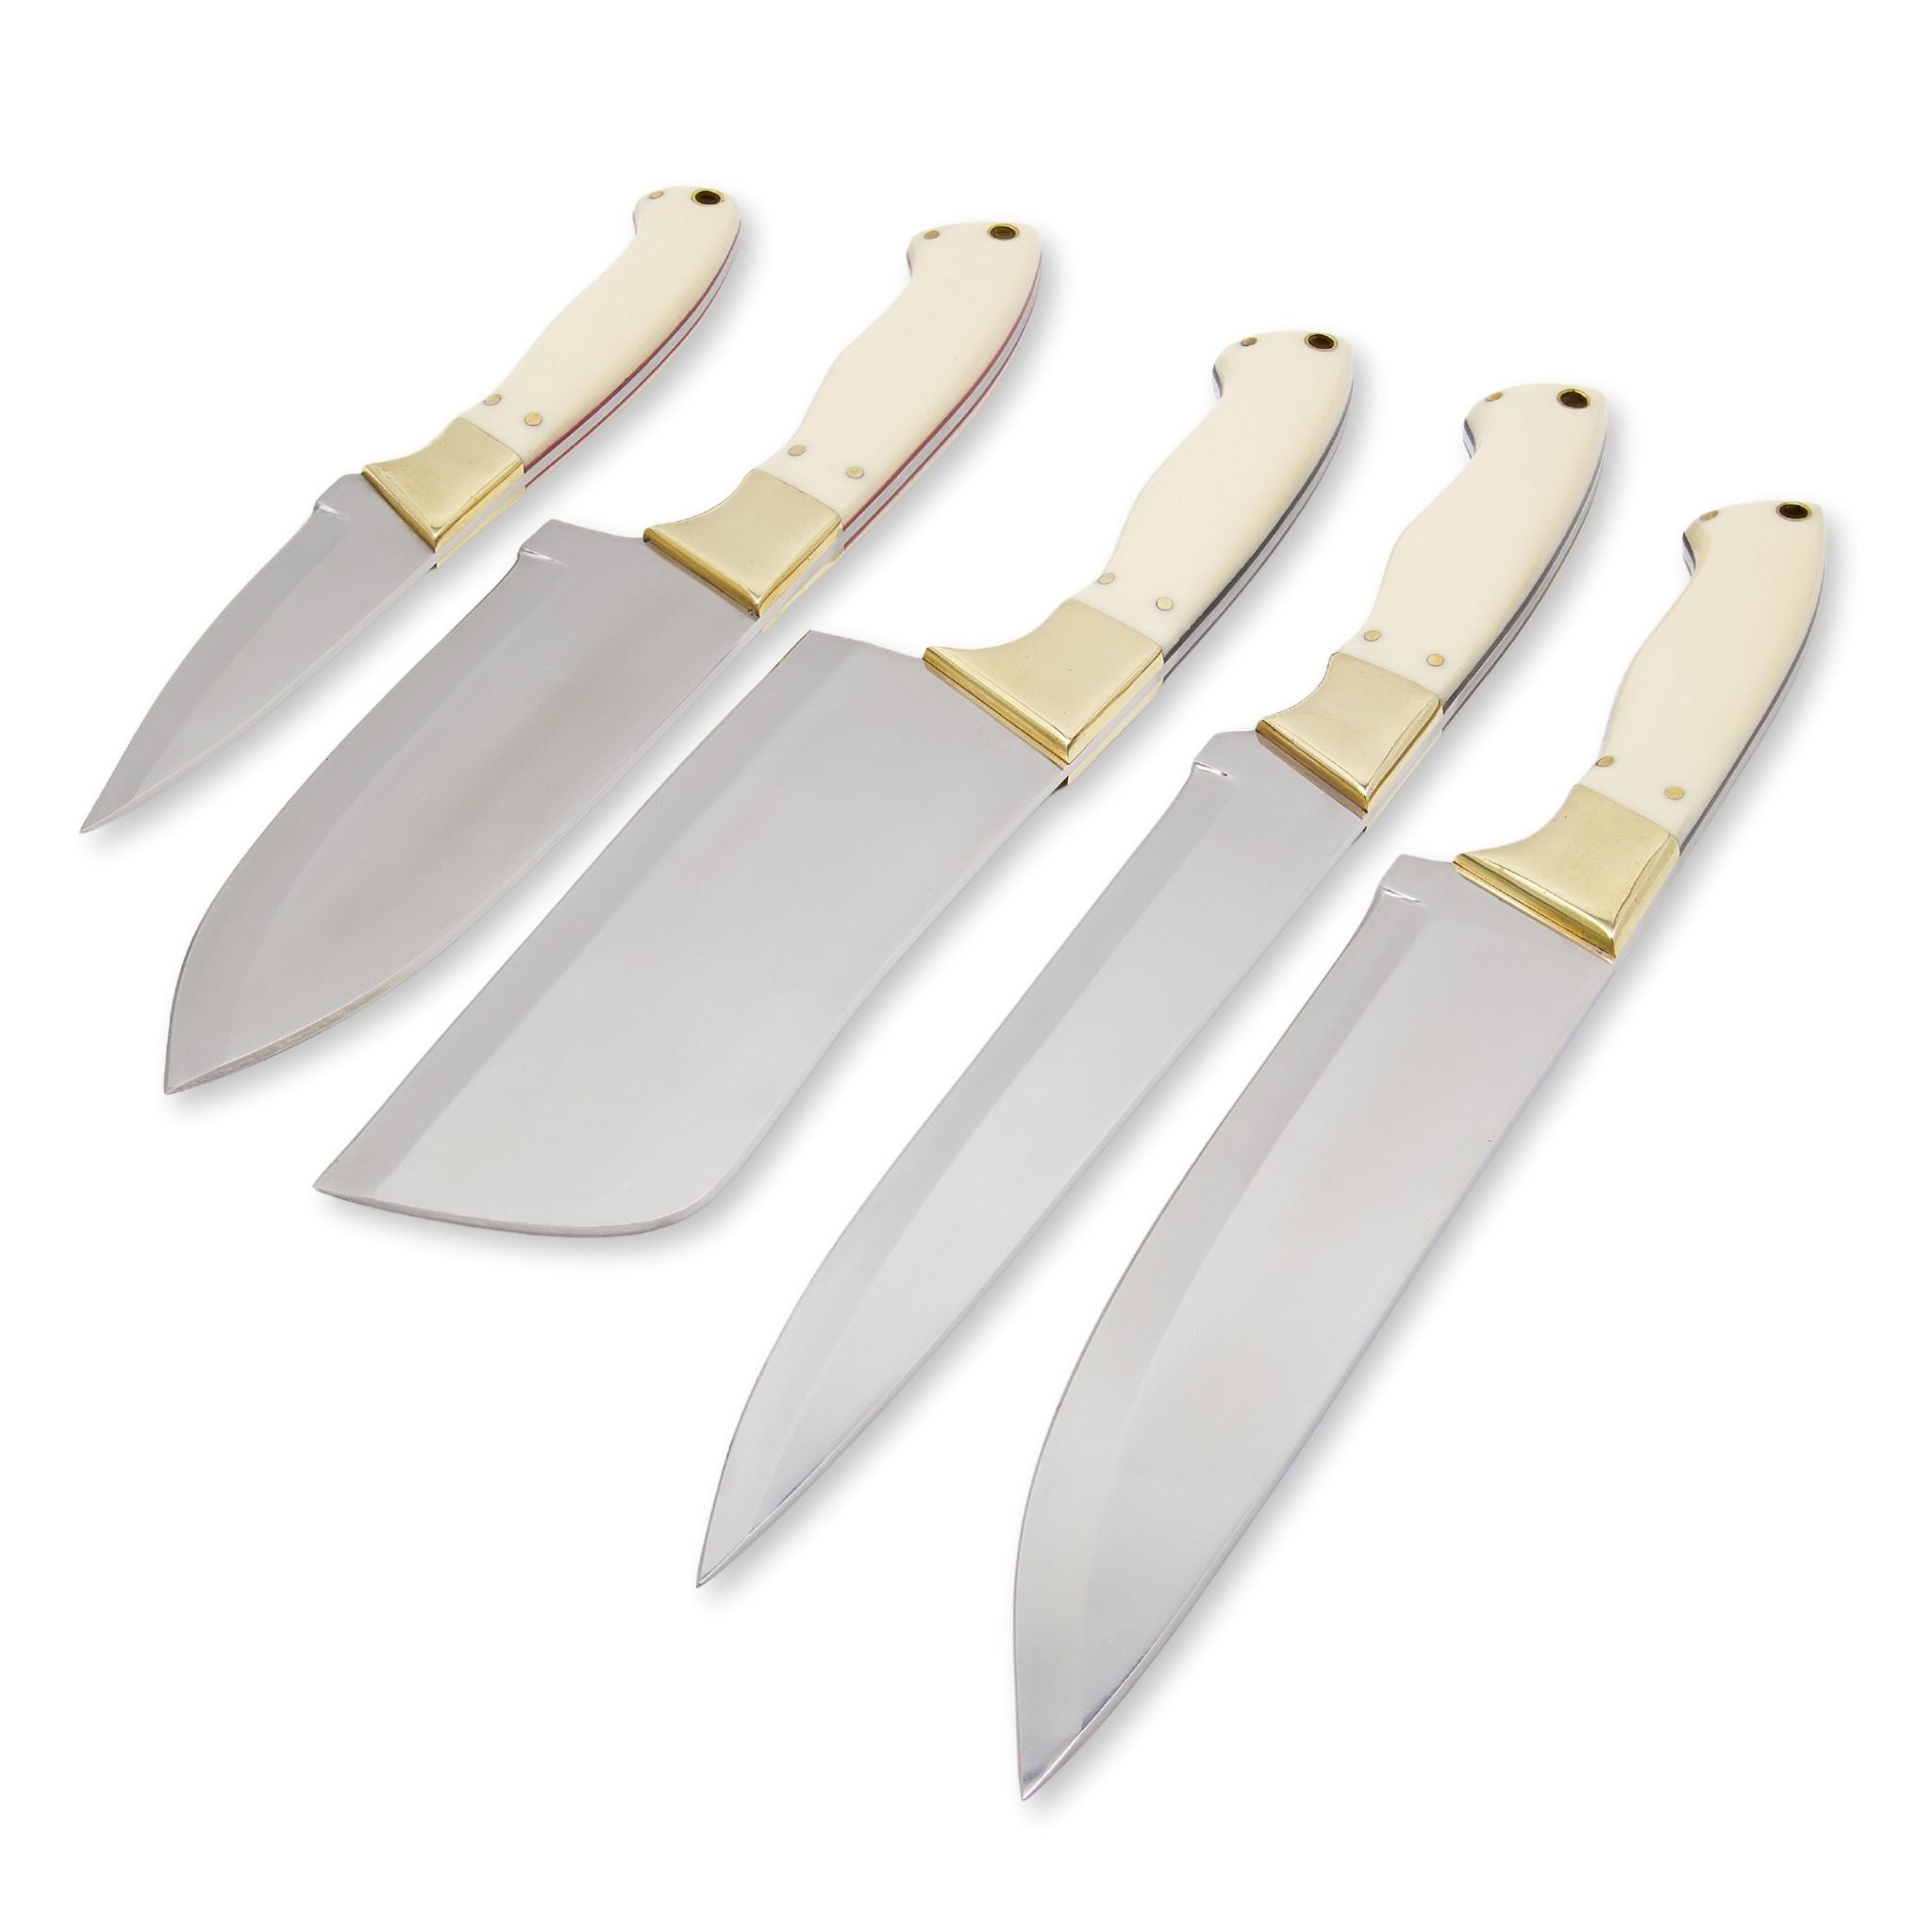 Chef Knife Set II, Stainless Steel, Handmade, with Genuine Leather Roll